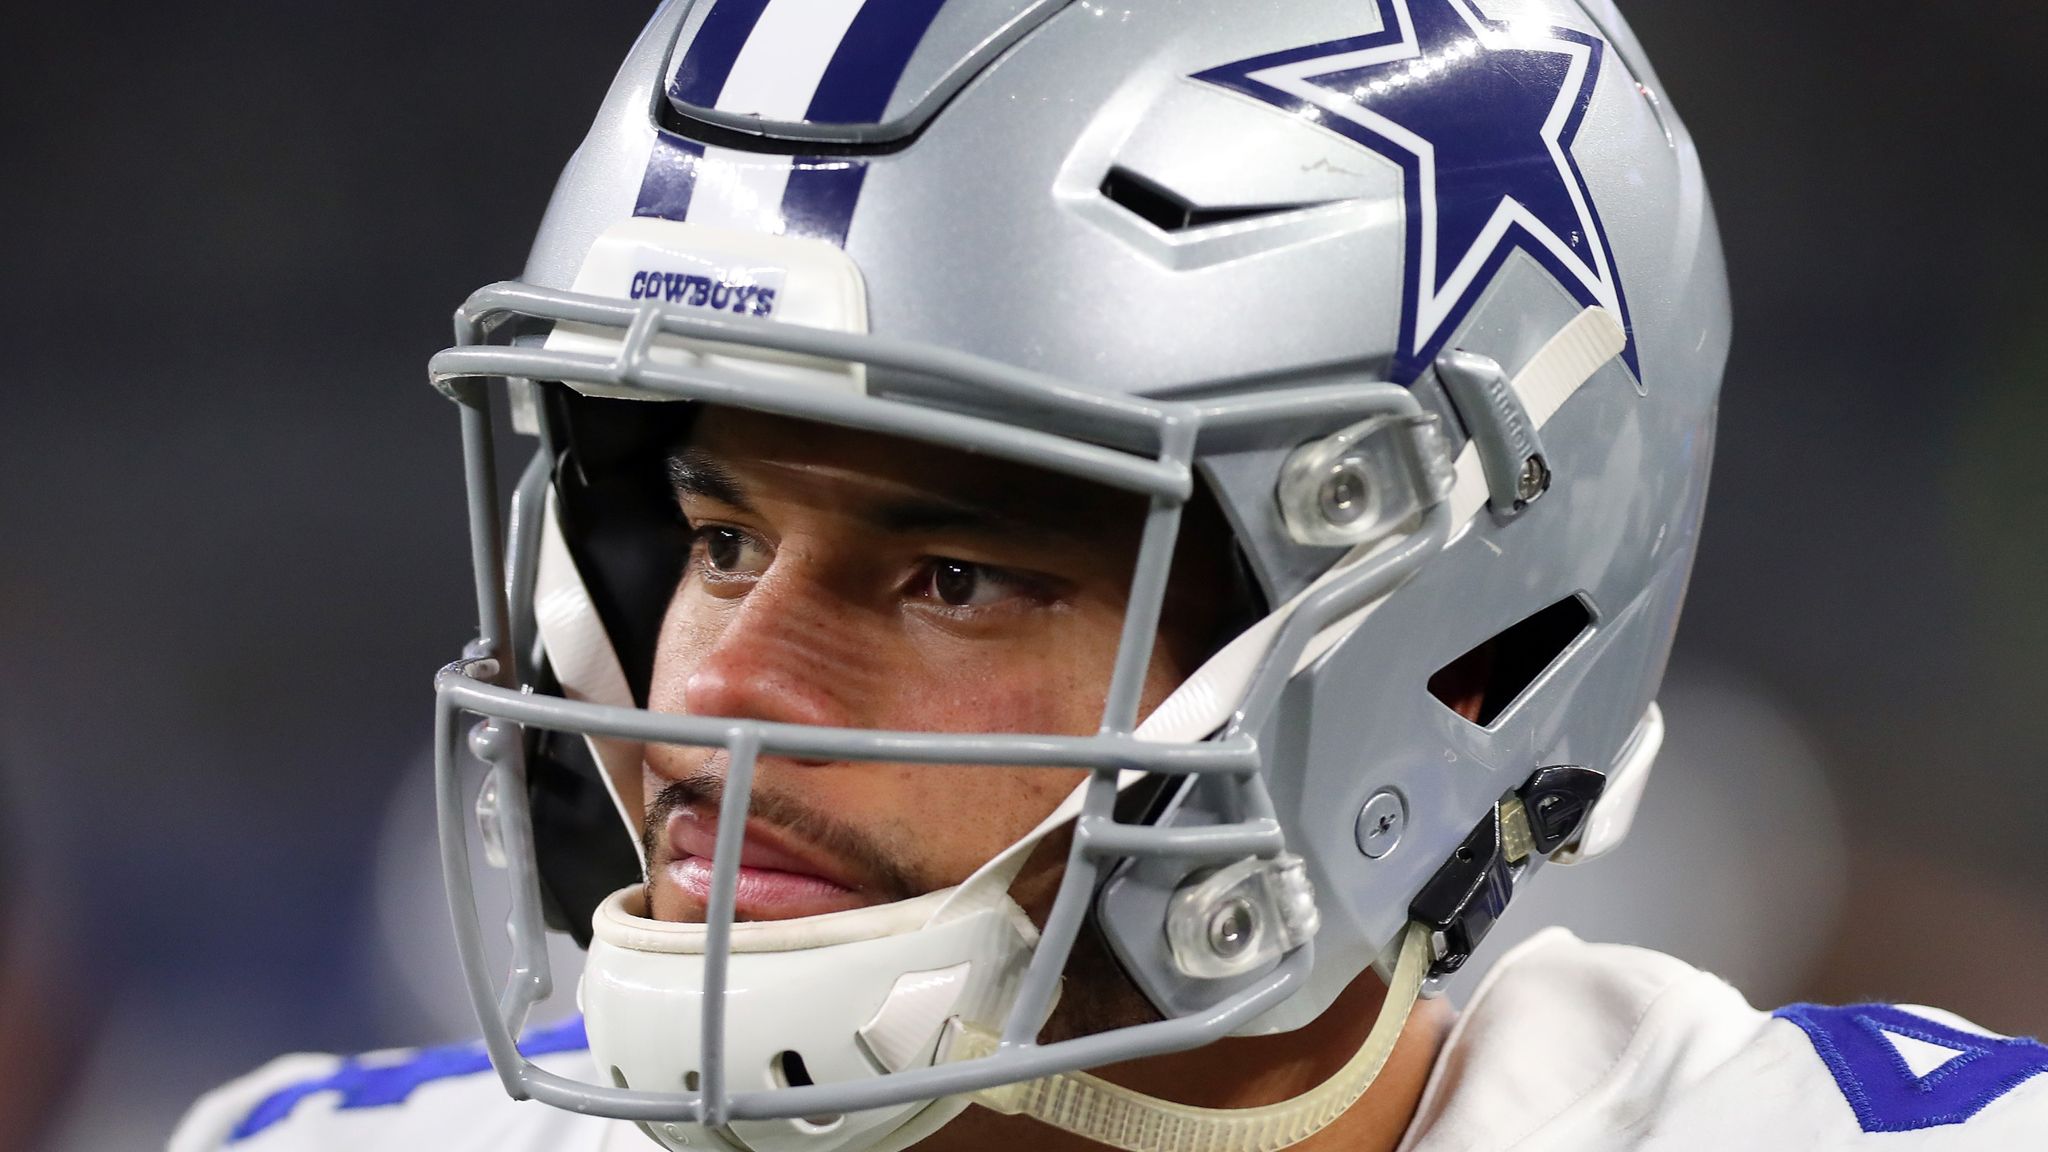 Dallas Cowboys are dominant, but one glaring problem looks ominous